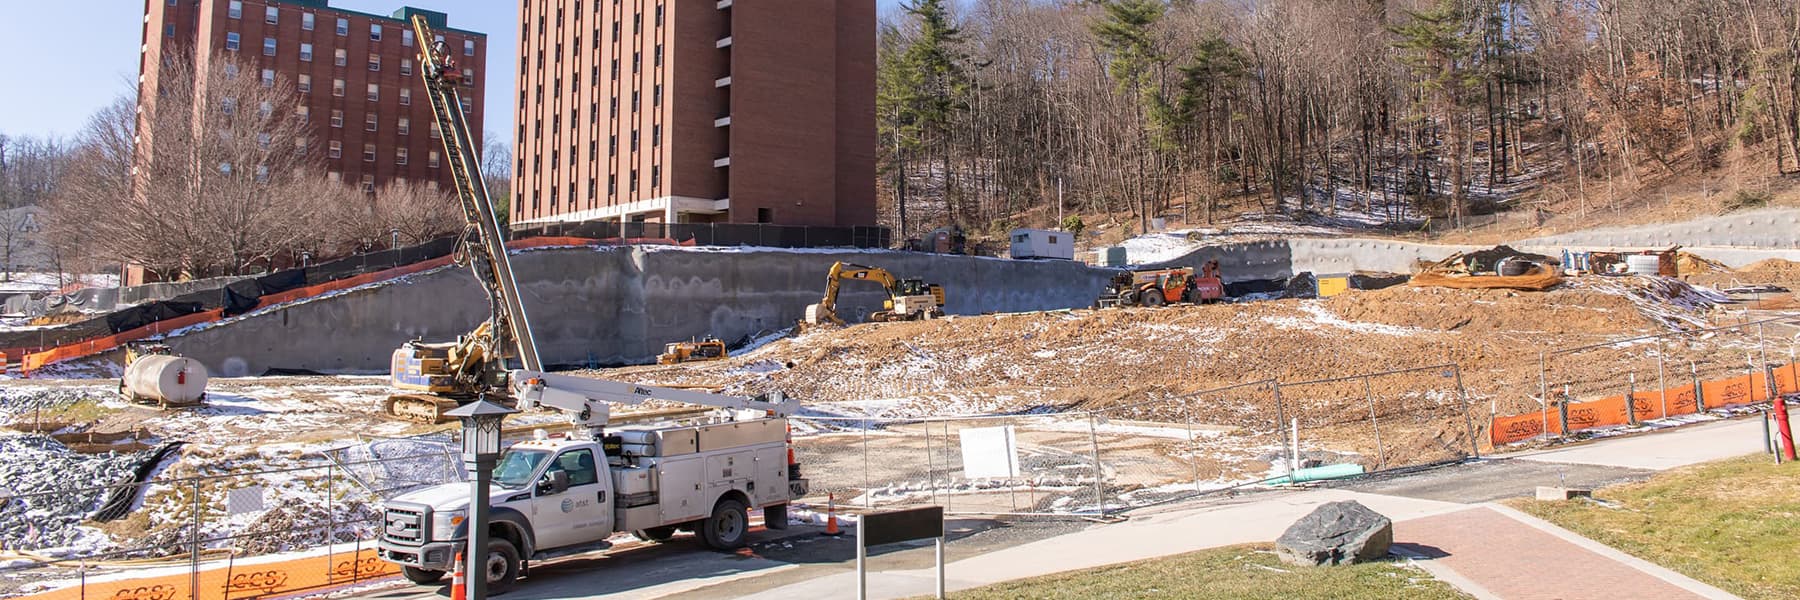 Construction on west side of campus